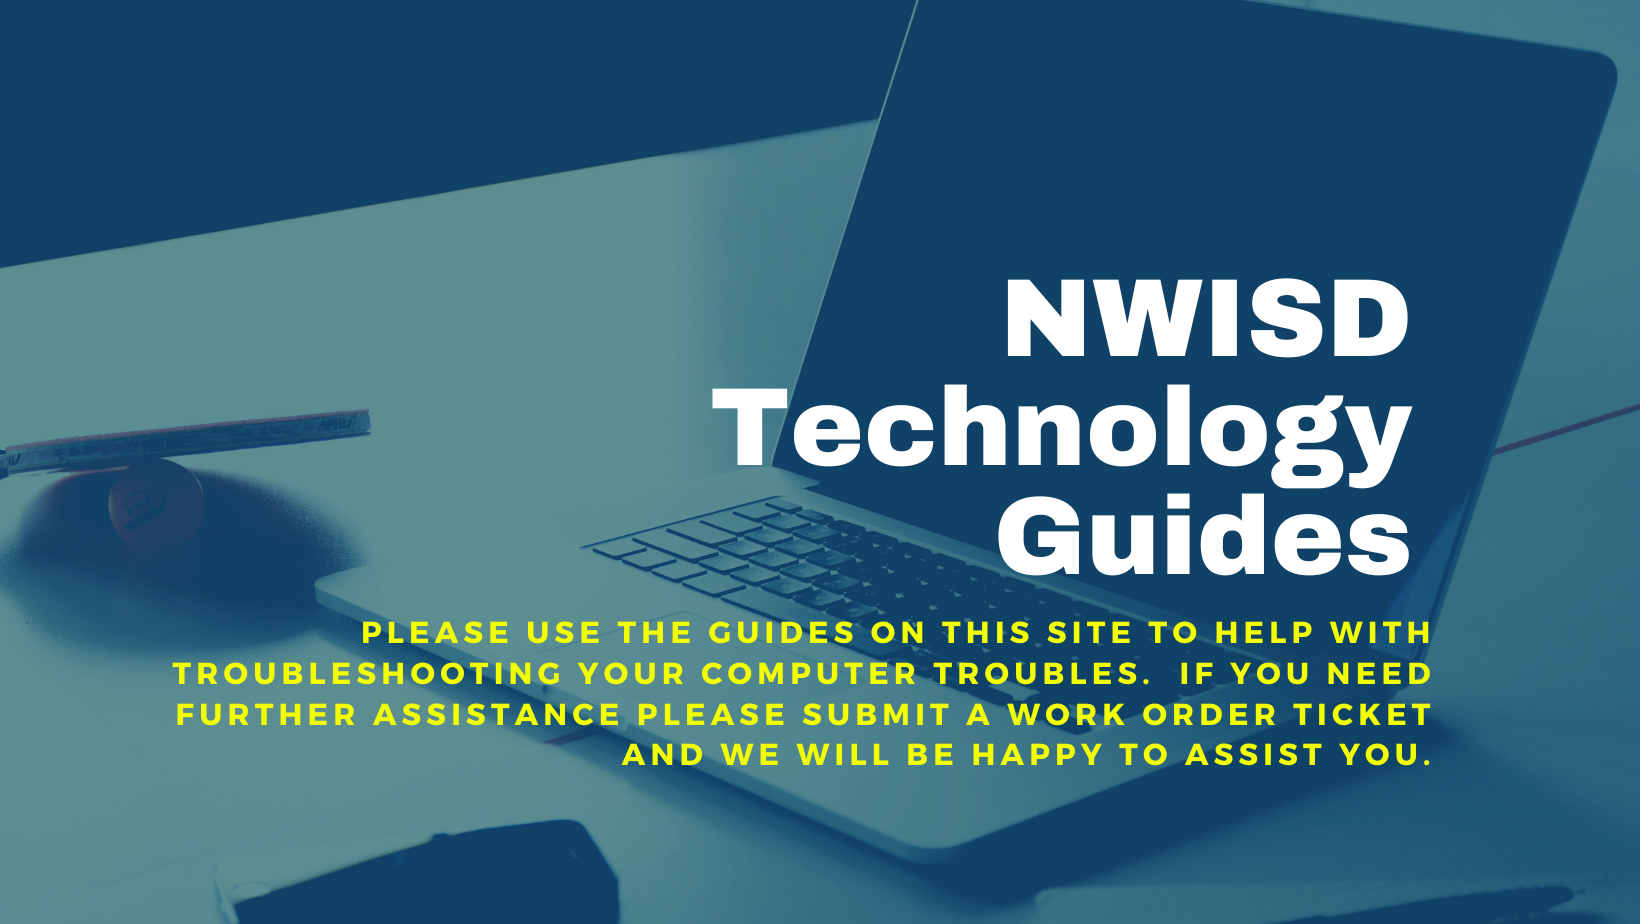 NWISD Technology Guides